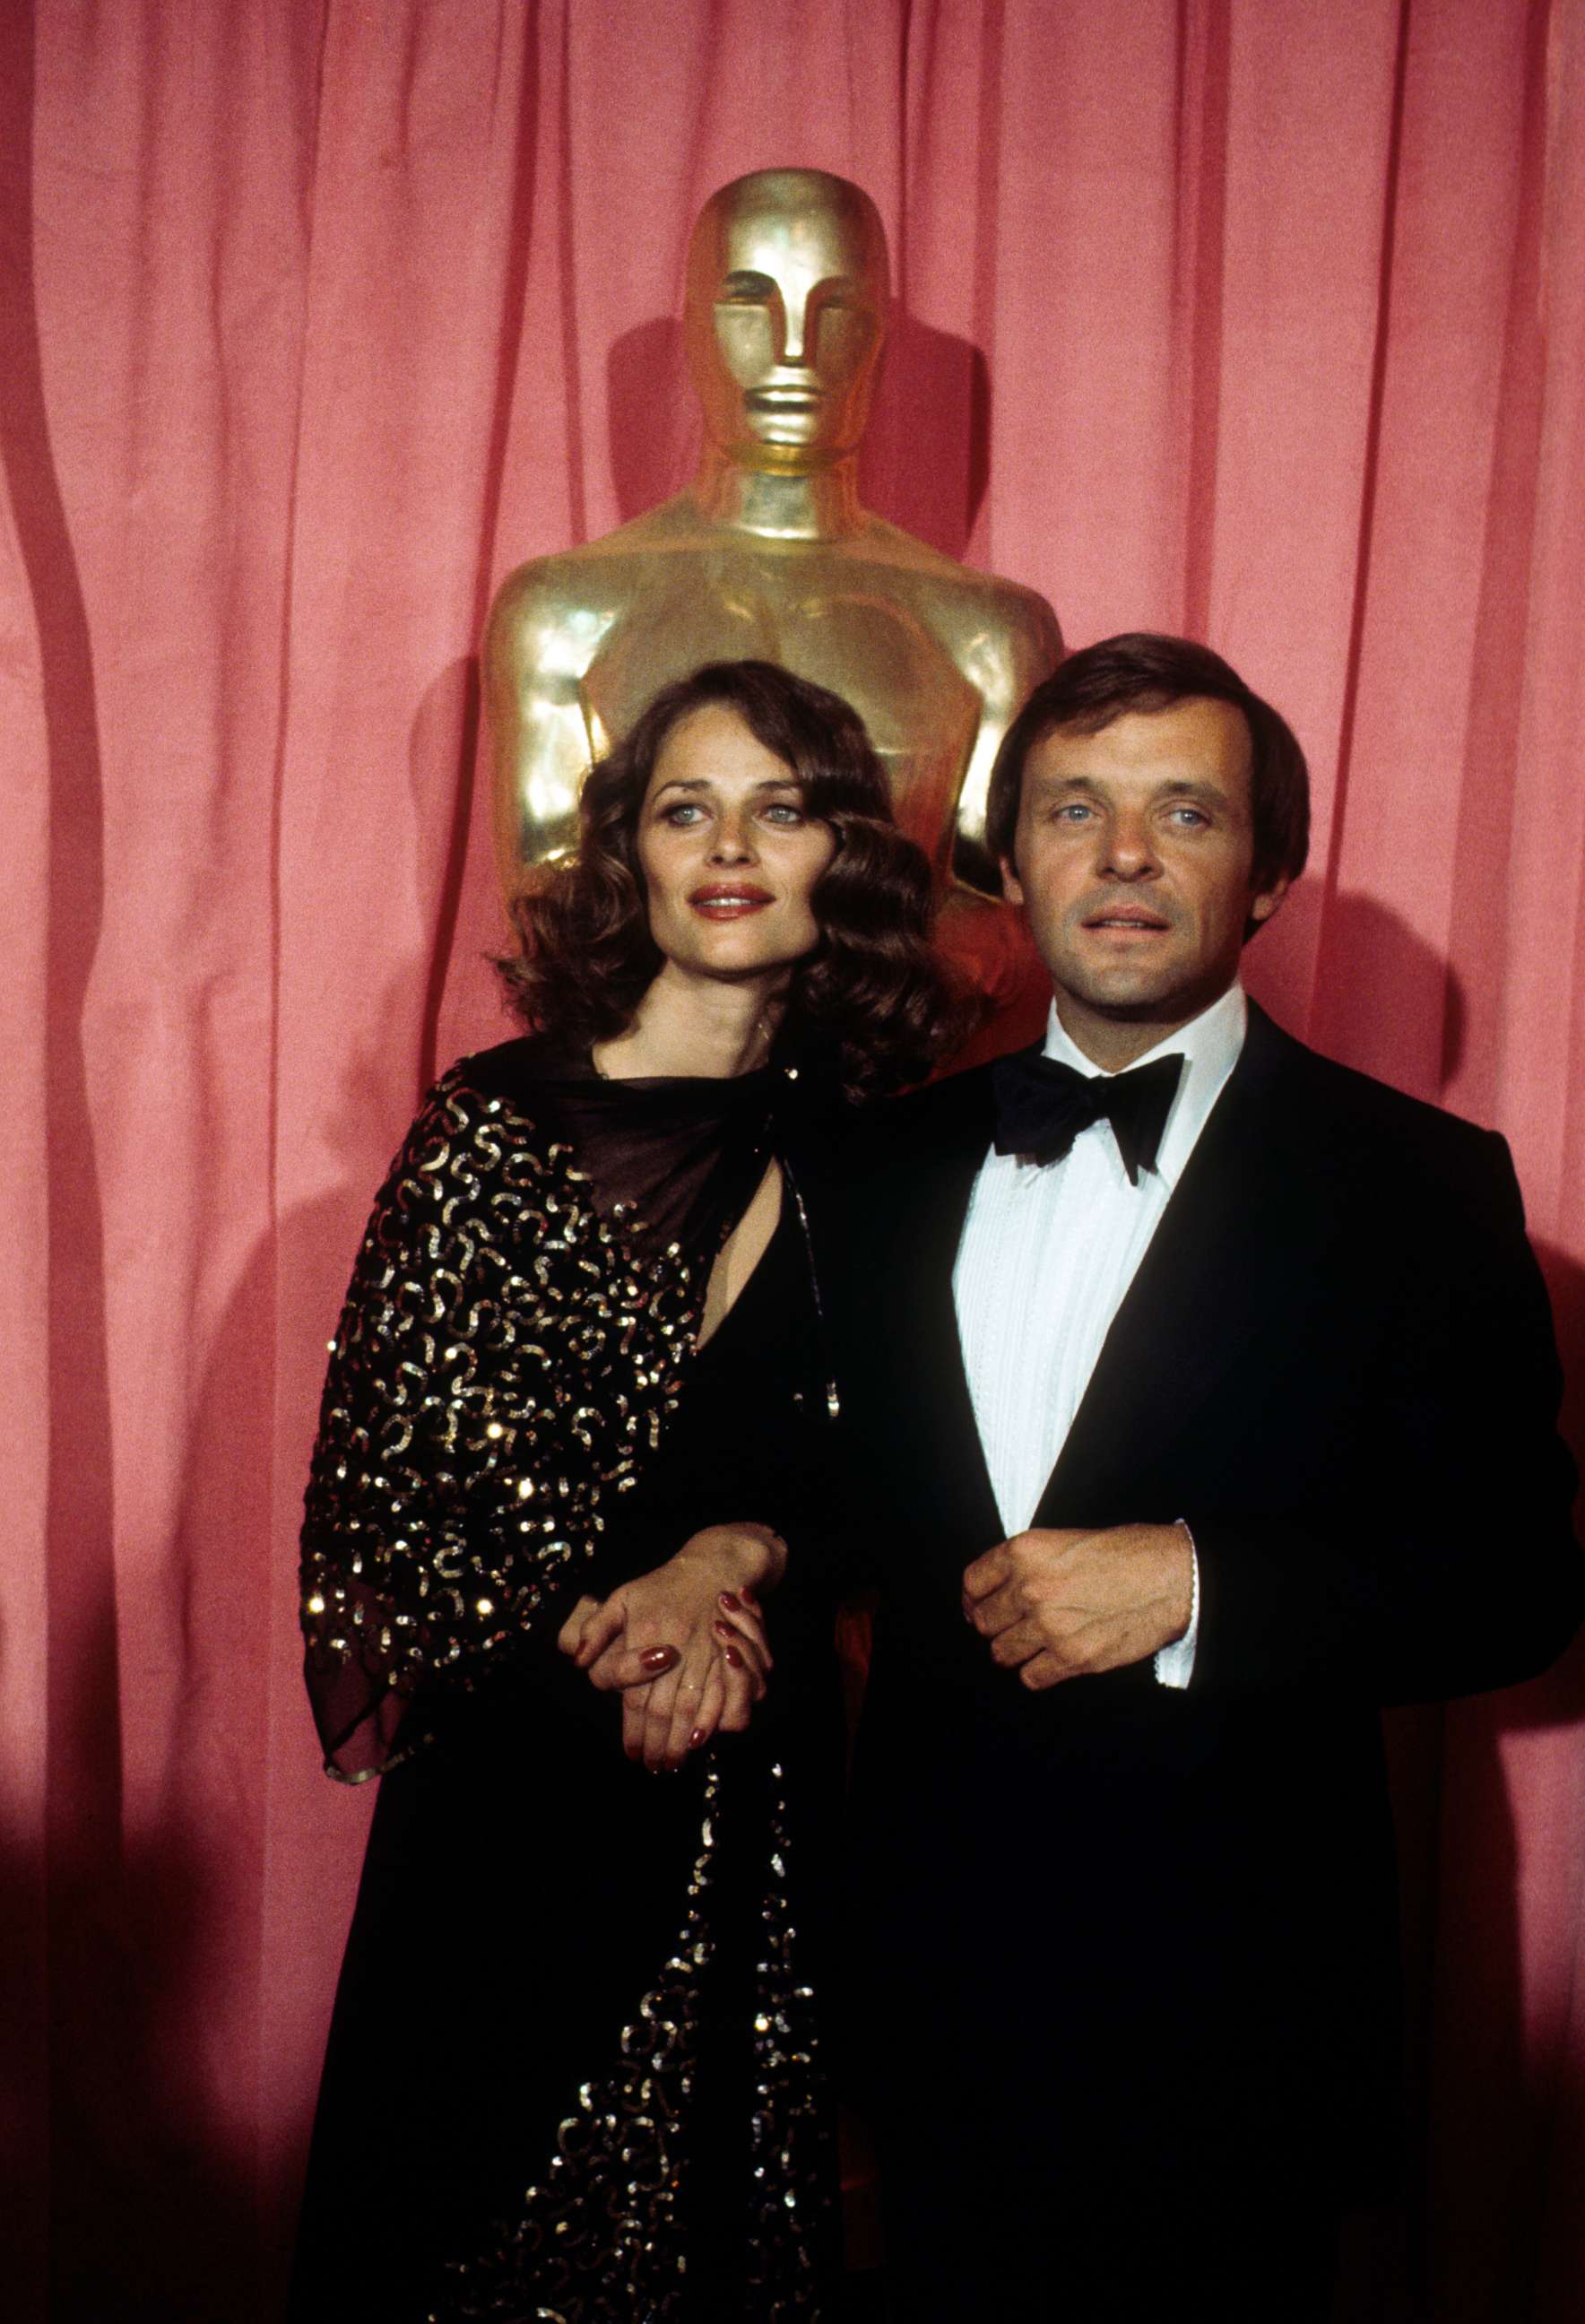 PHOTO: THE 48TH ANNUAL ACADEMY AWARDS - Show Coverage - Airdate: March 29, 1976. (Photo by Walt Disney Television via Getty Images Photo Archives/Walt Disney Television via Getty Images)
CHARLOTTE RAMPLING;ANTHONY HOPKINS